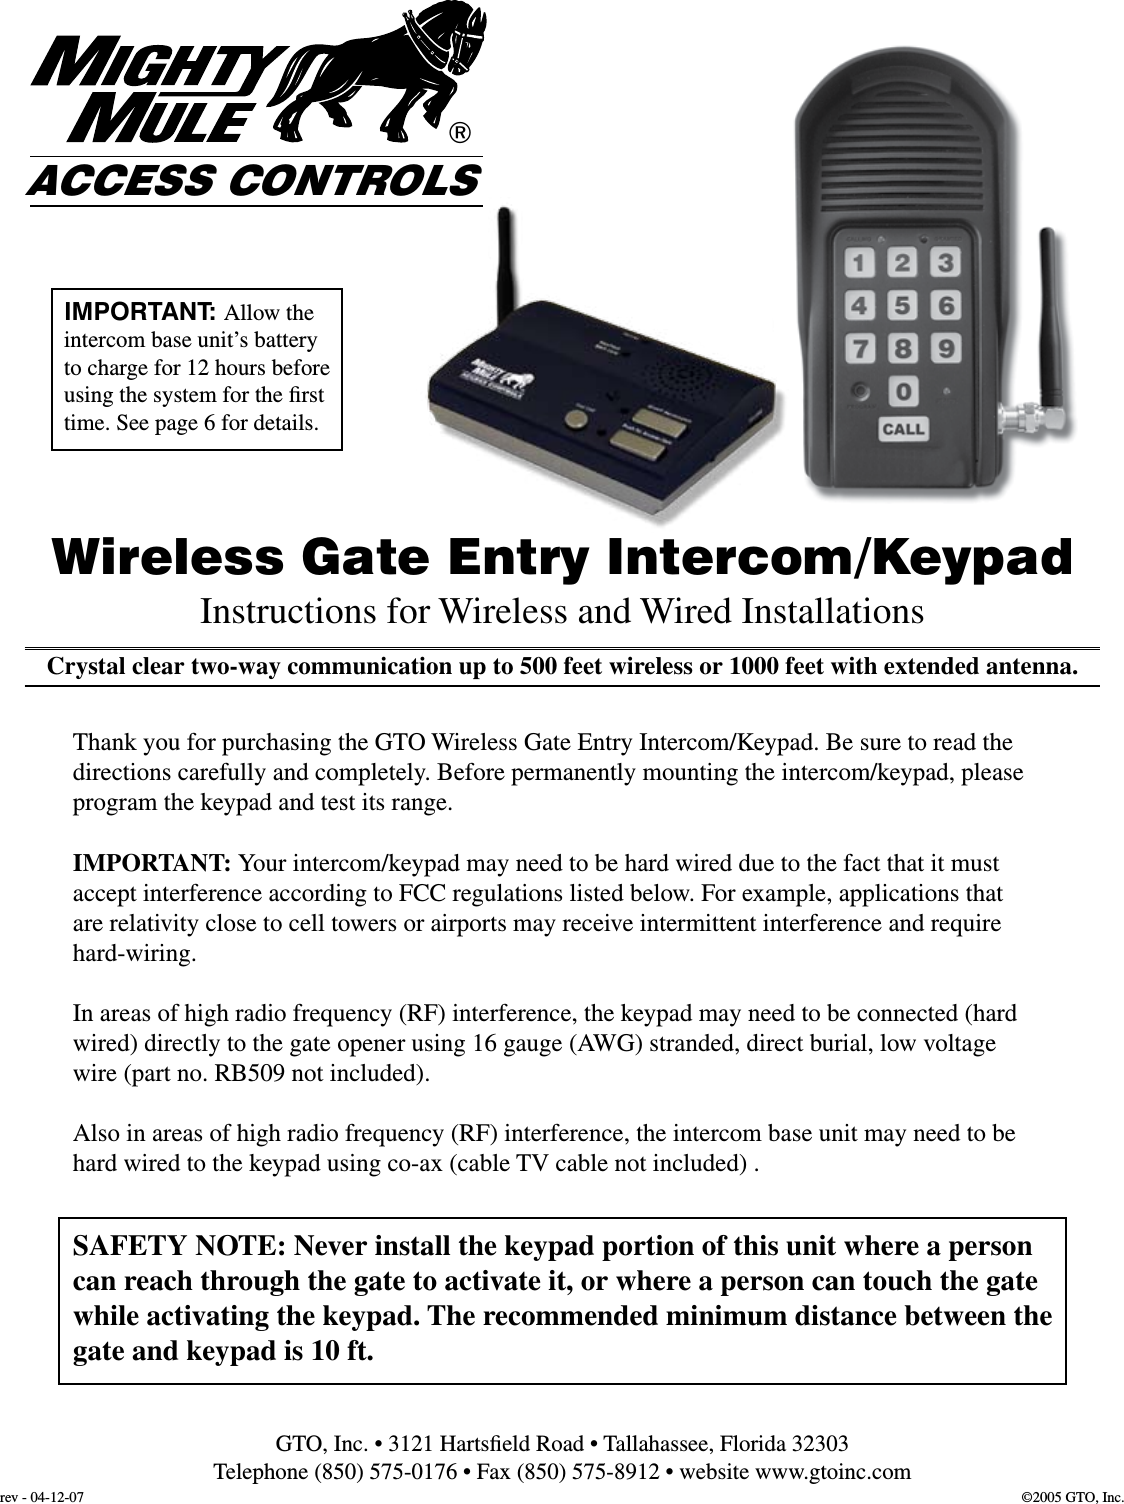 Crystal clear two-way communication up to 500 feet wireless or 1000 feet with extended antenna.Wireless Gate Entry Intercom/KeypadThank you for purchasing the GTO Wireless Gate Entry Intercom/Keypad. Be sure to read the directions carefully and completely. Before permanently mounting the intercom/keypad, please program the keypad and test its range.IMPORTANT: Your intercom/keypad may need to be hard wired due to the fact that it must accept interference according to FCC regulations listed below. For example, applications that are relativity close to cell towers or airports may receive intermittent interference and require hard-wiring.In areas of high radio frequency (RF) interference, the keypad may need to be connected (hard wired) directly to the gate opener using 16 gauge (AWG) stranded, direct burial, low voltage wire (part no. RB509 not included).Also in areas of high radio frequency (RF) interference, the intercom base unit may need to be hard wired to the keypad using co-ax (cable TV cable not included) .Instructions for Wireless and Wired Installations®ACCESS CONTROLSGTO, Inc. • 3121 Hartsﬁeld Road • Tallahassee, Florida 32303Telephone (850) 575-0176 • Fax (850) 575-8912 • website www.gtoinc.comSAFETY NOTE: Never install the keypad portion of this unit where a person can reach through the gate to activate it, or where a person can touch the gate while activating the keypad. The recommended minimum distance between the gate and keypad is 10 ft.©2005 GTO, Inc.rev - 04-12-07IMPORTANT: Allow the intercom base unit’s battery to charge for 12 hours before using the system for the ﬁrst time. See page 6 for details.